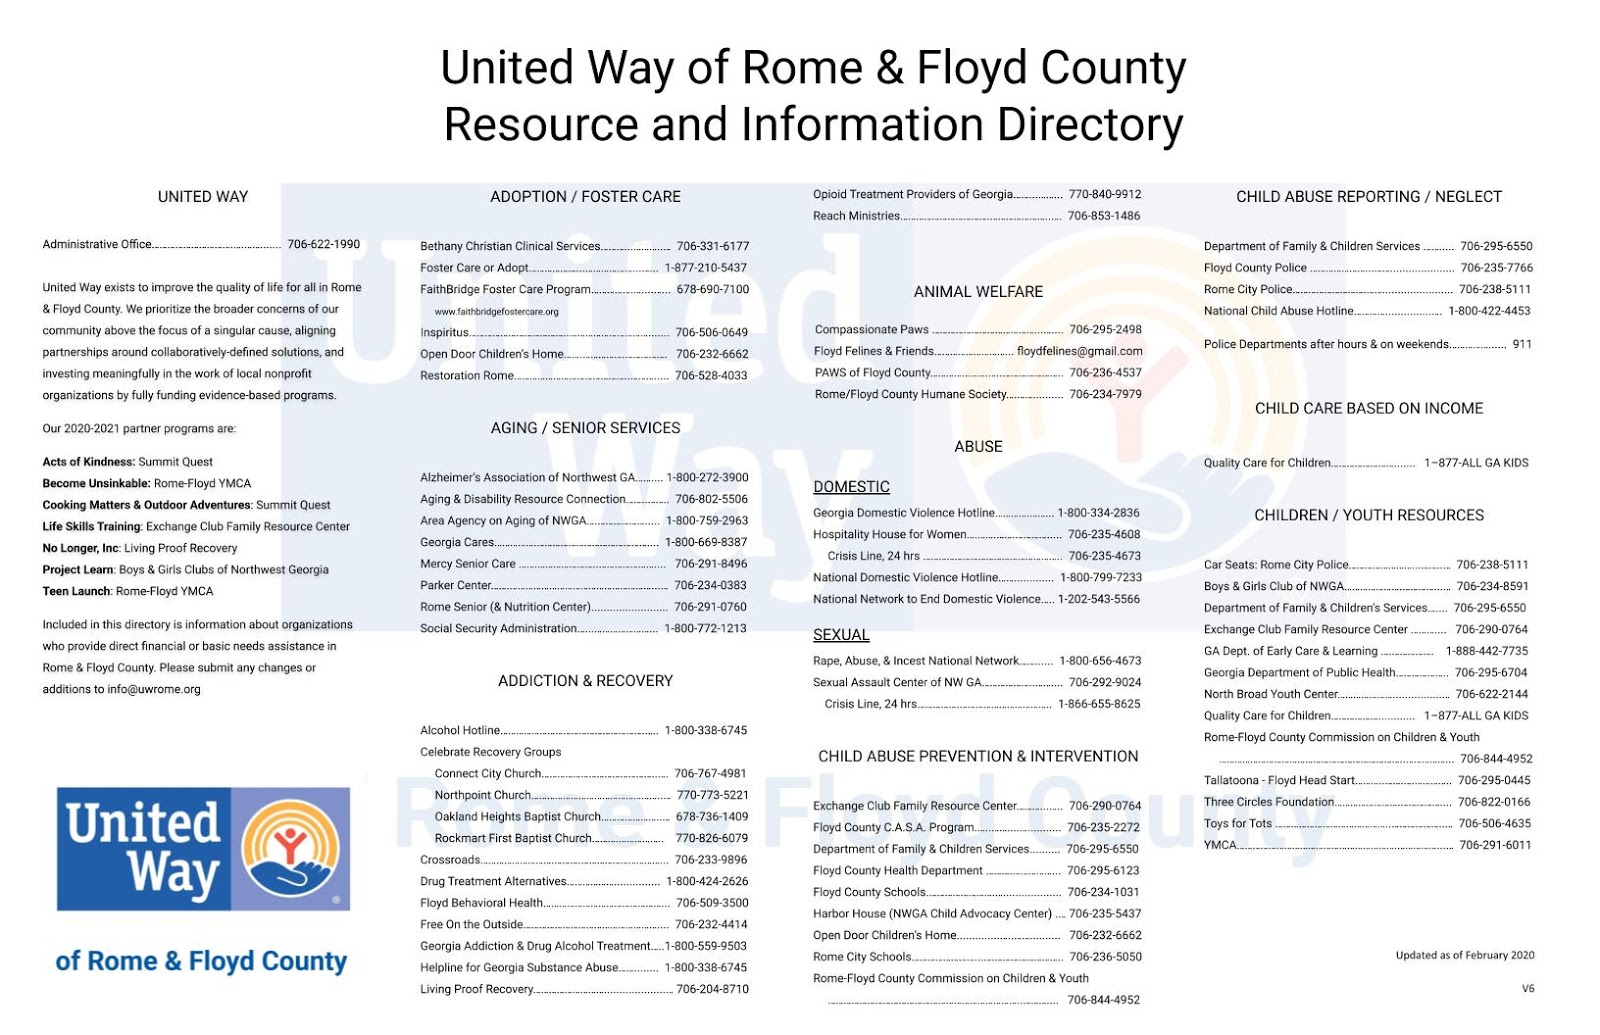 resource-guides-united-way-of-rome-floyd-county